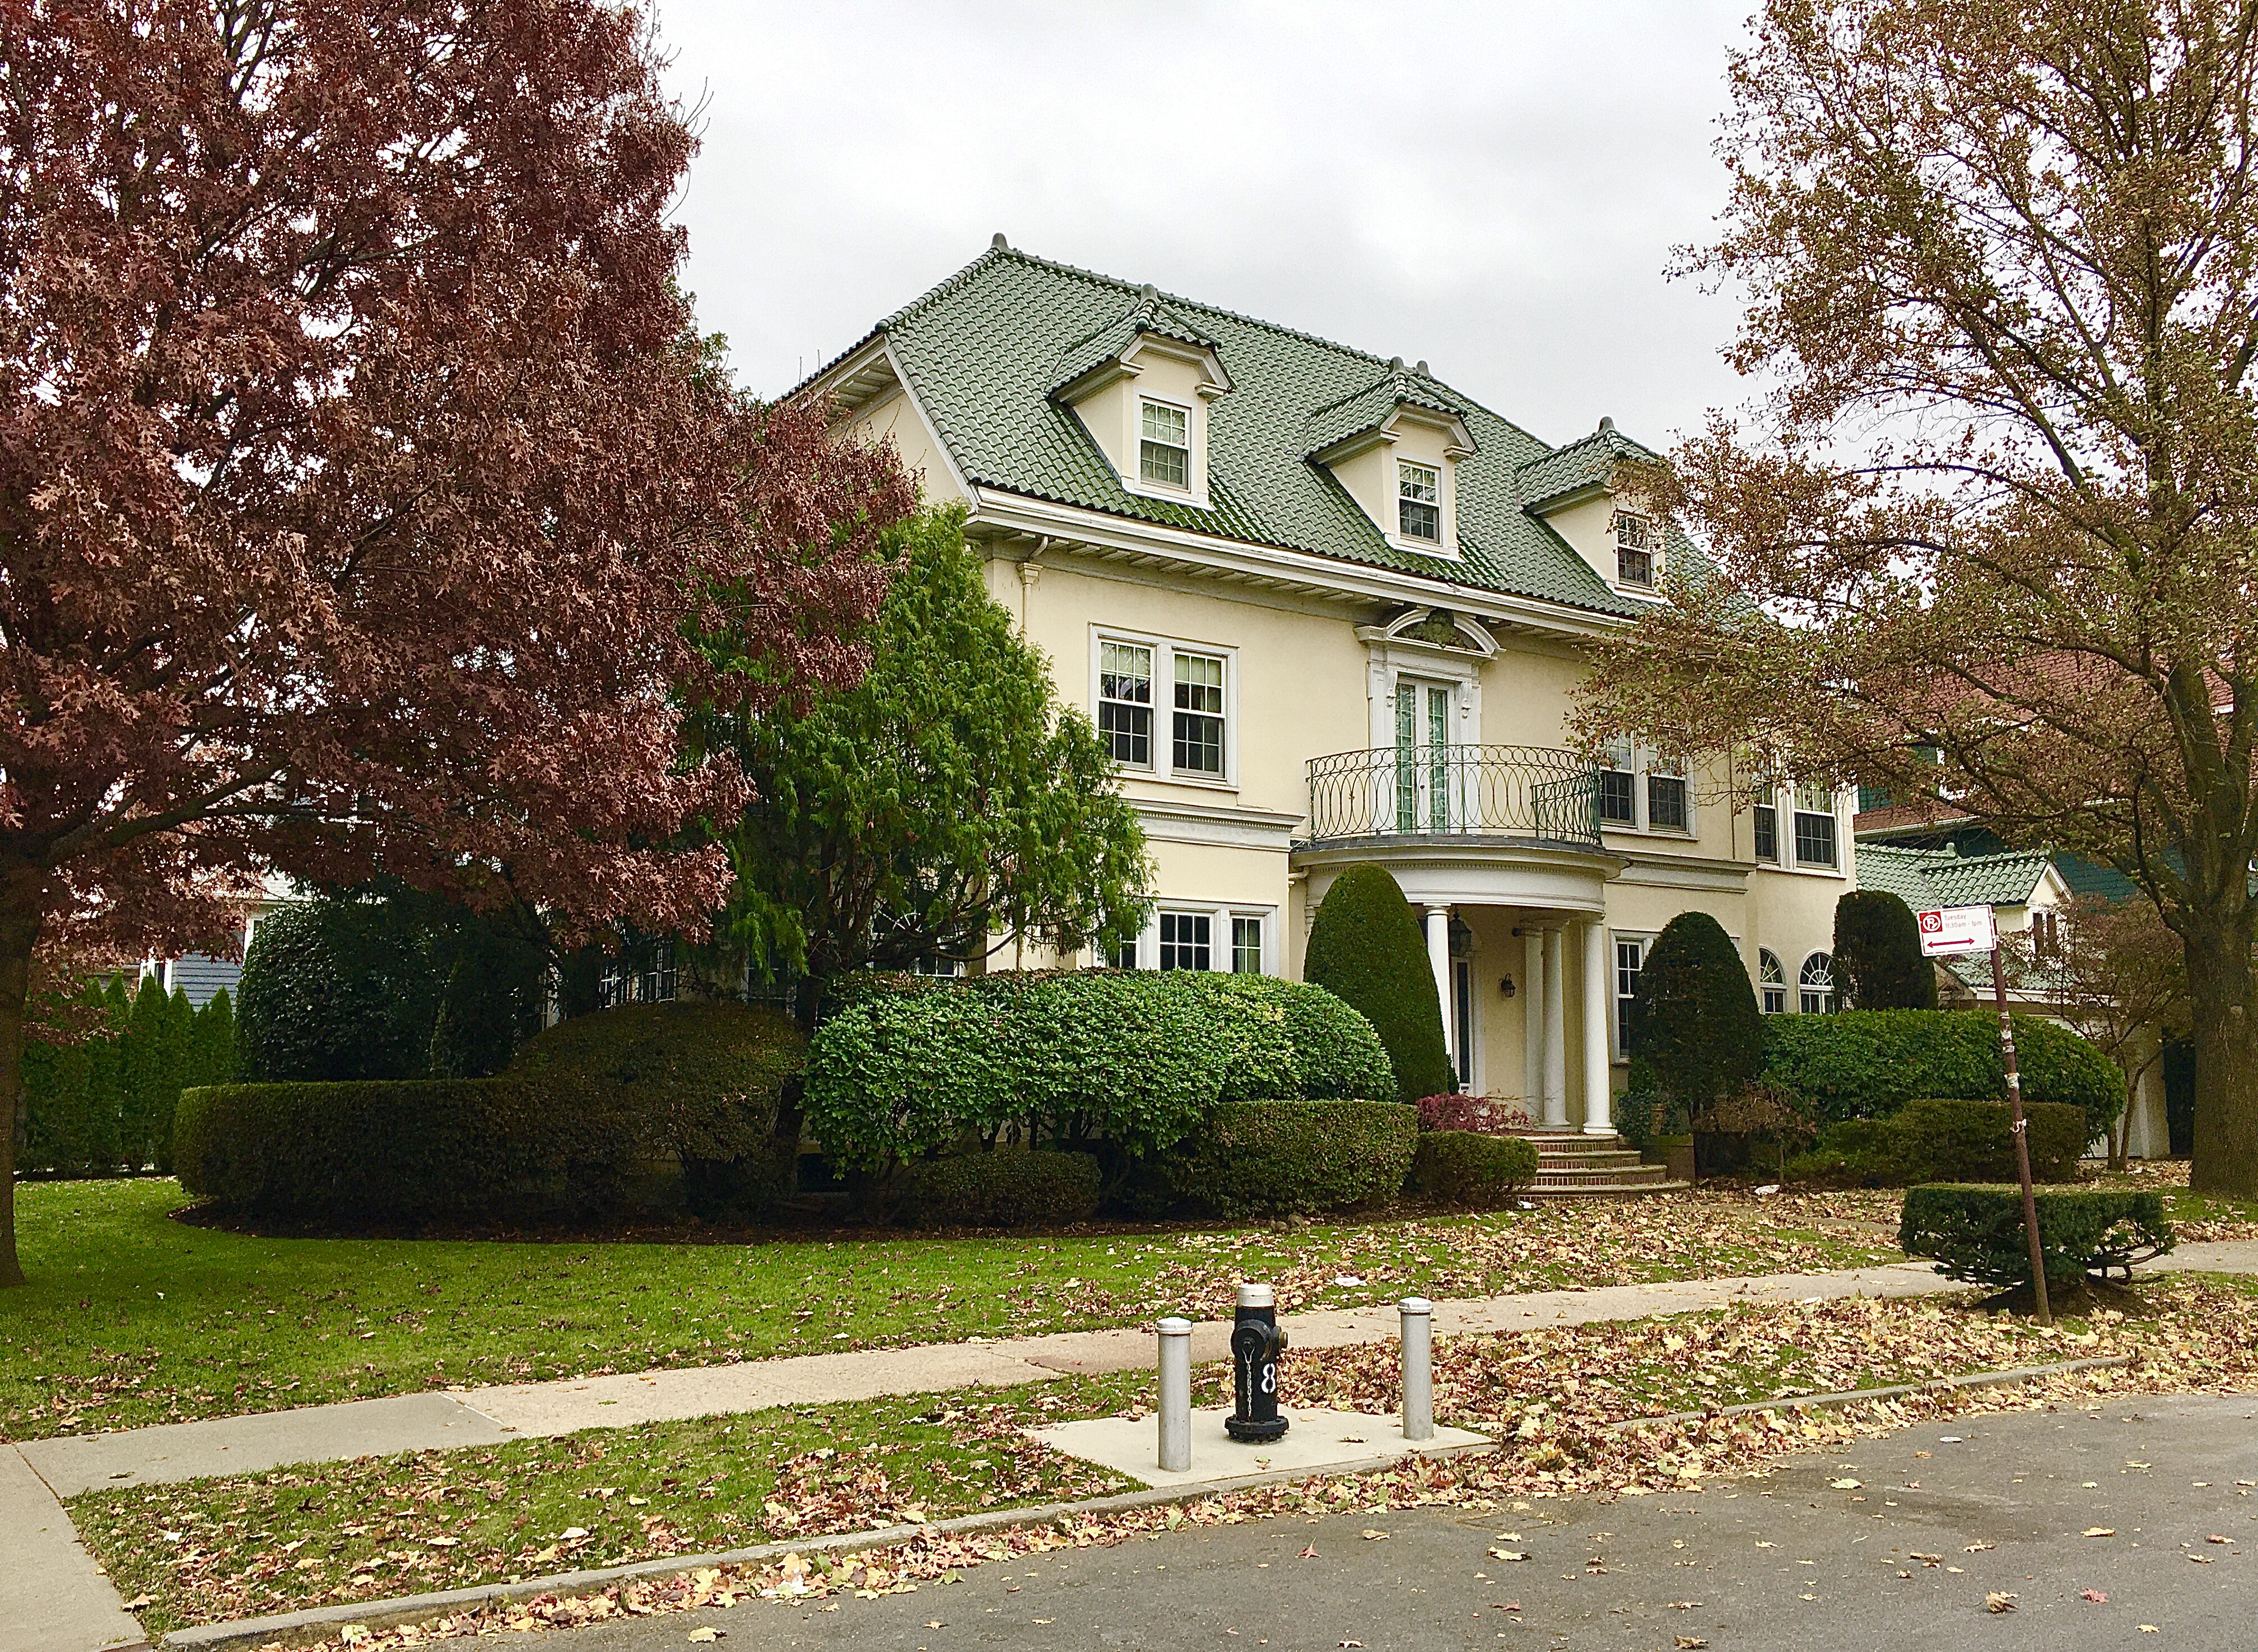  This is handsome 115 Westminster Road in the Prospect Park South Historic District. Photo: Lore Croghan/Brooklyn Eagle